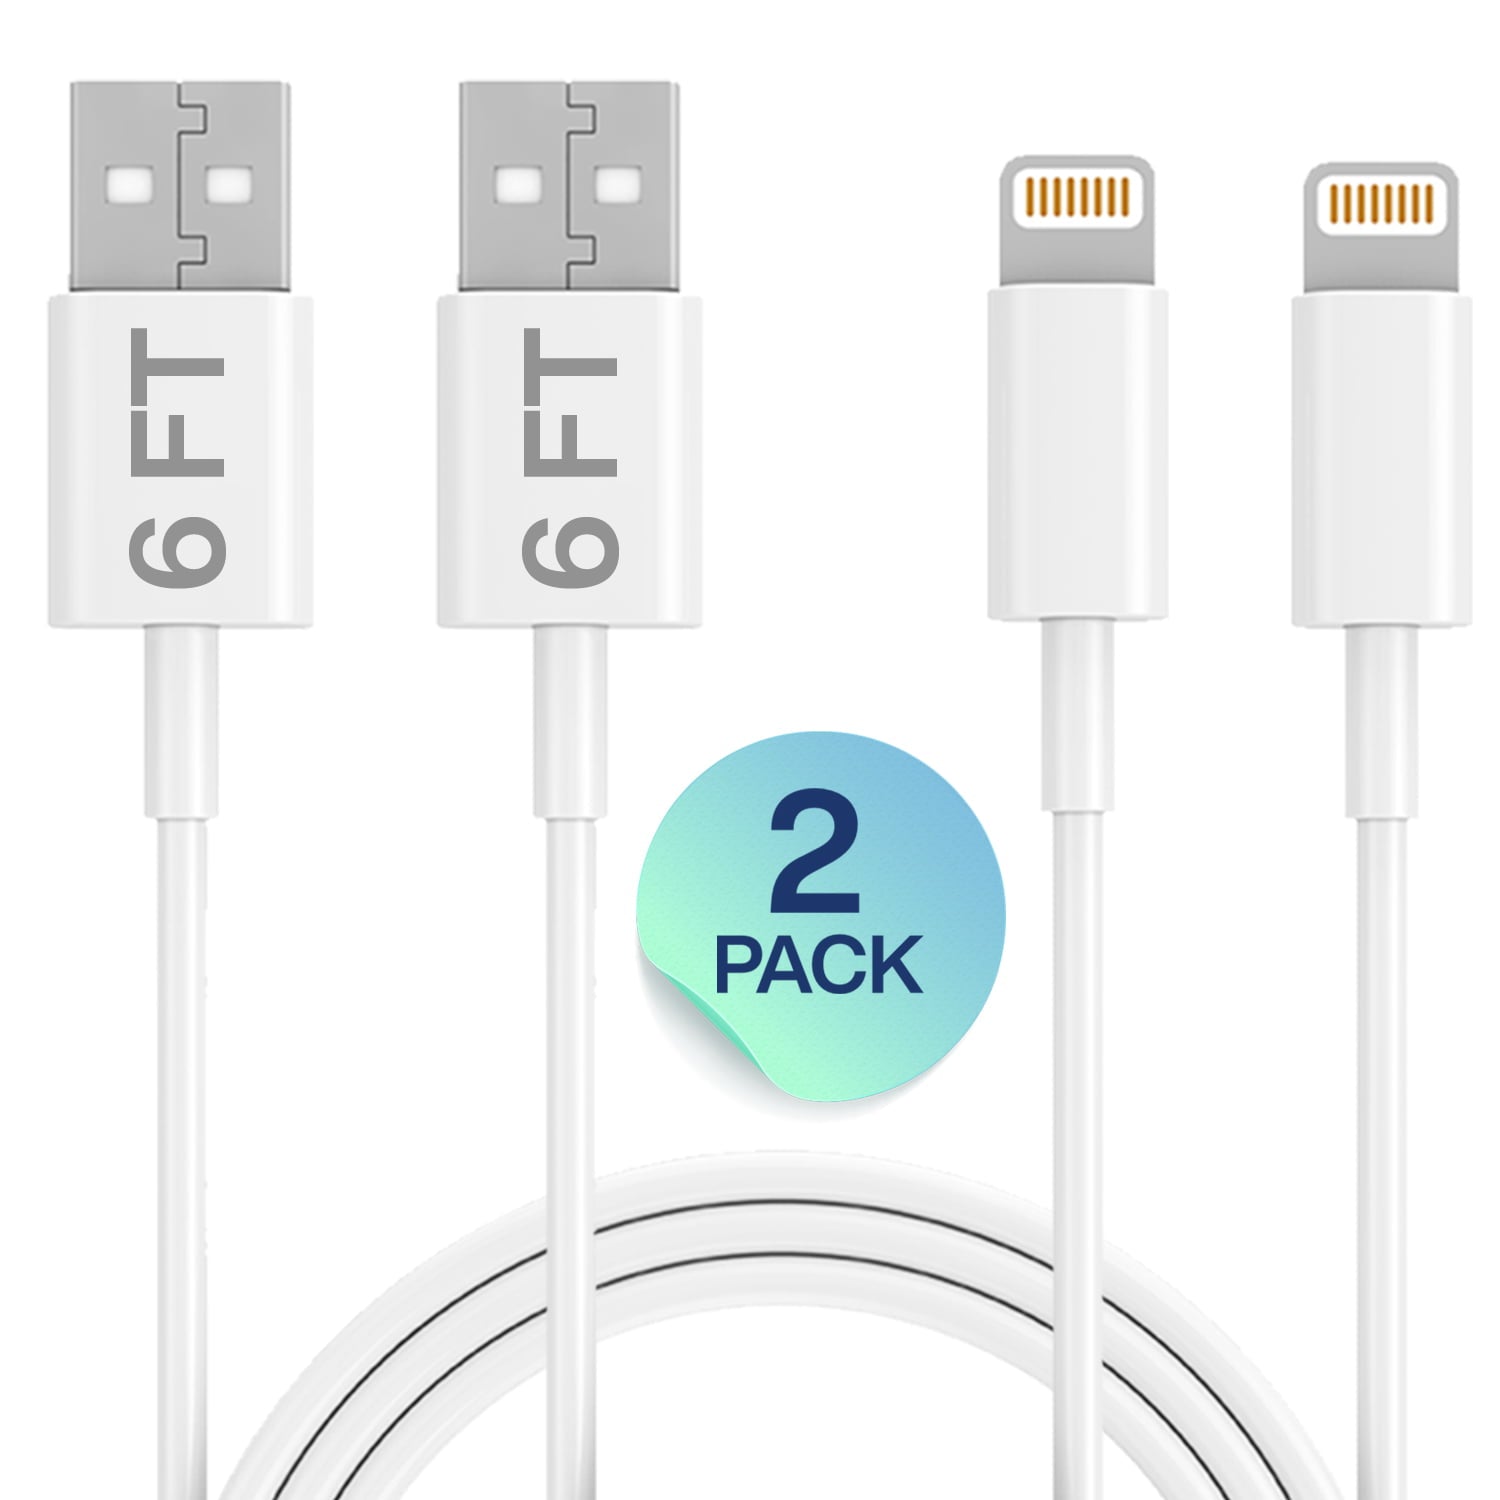 iPhone Charger Lightning Cable - Ixir, 2 Pack 6FT USB Cable, Compatible with Apple iPhone Xs,Xs Max,XR,X,8,8 Plus,7,7 Plus,6S,6S Plus,iPad Air,Mini/iPod Touch/Case, Charging & Syncing Cord